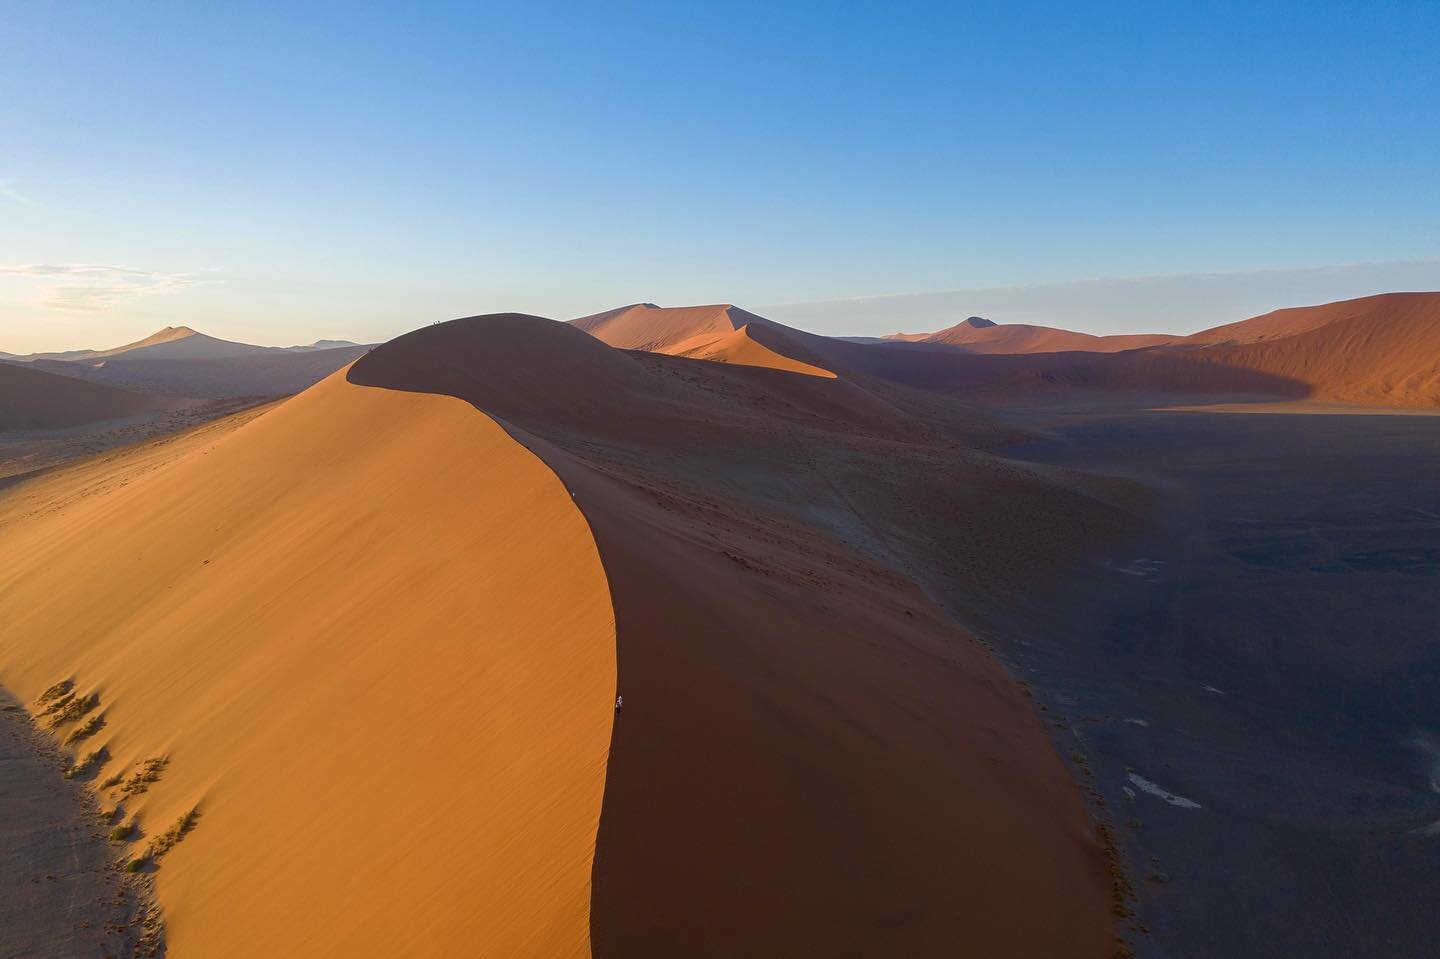 Climbing the Big daddy Sand dune and having an amazing view of the entire Sossuvlei plains was one memorable sight to behold. #insidenamibia #visitnamibia